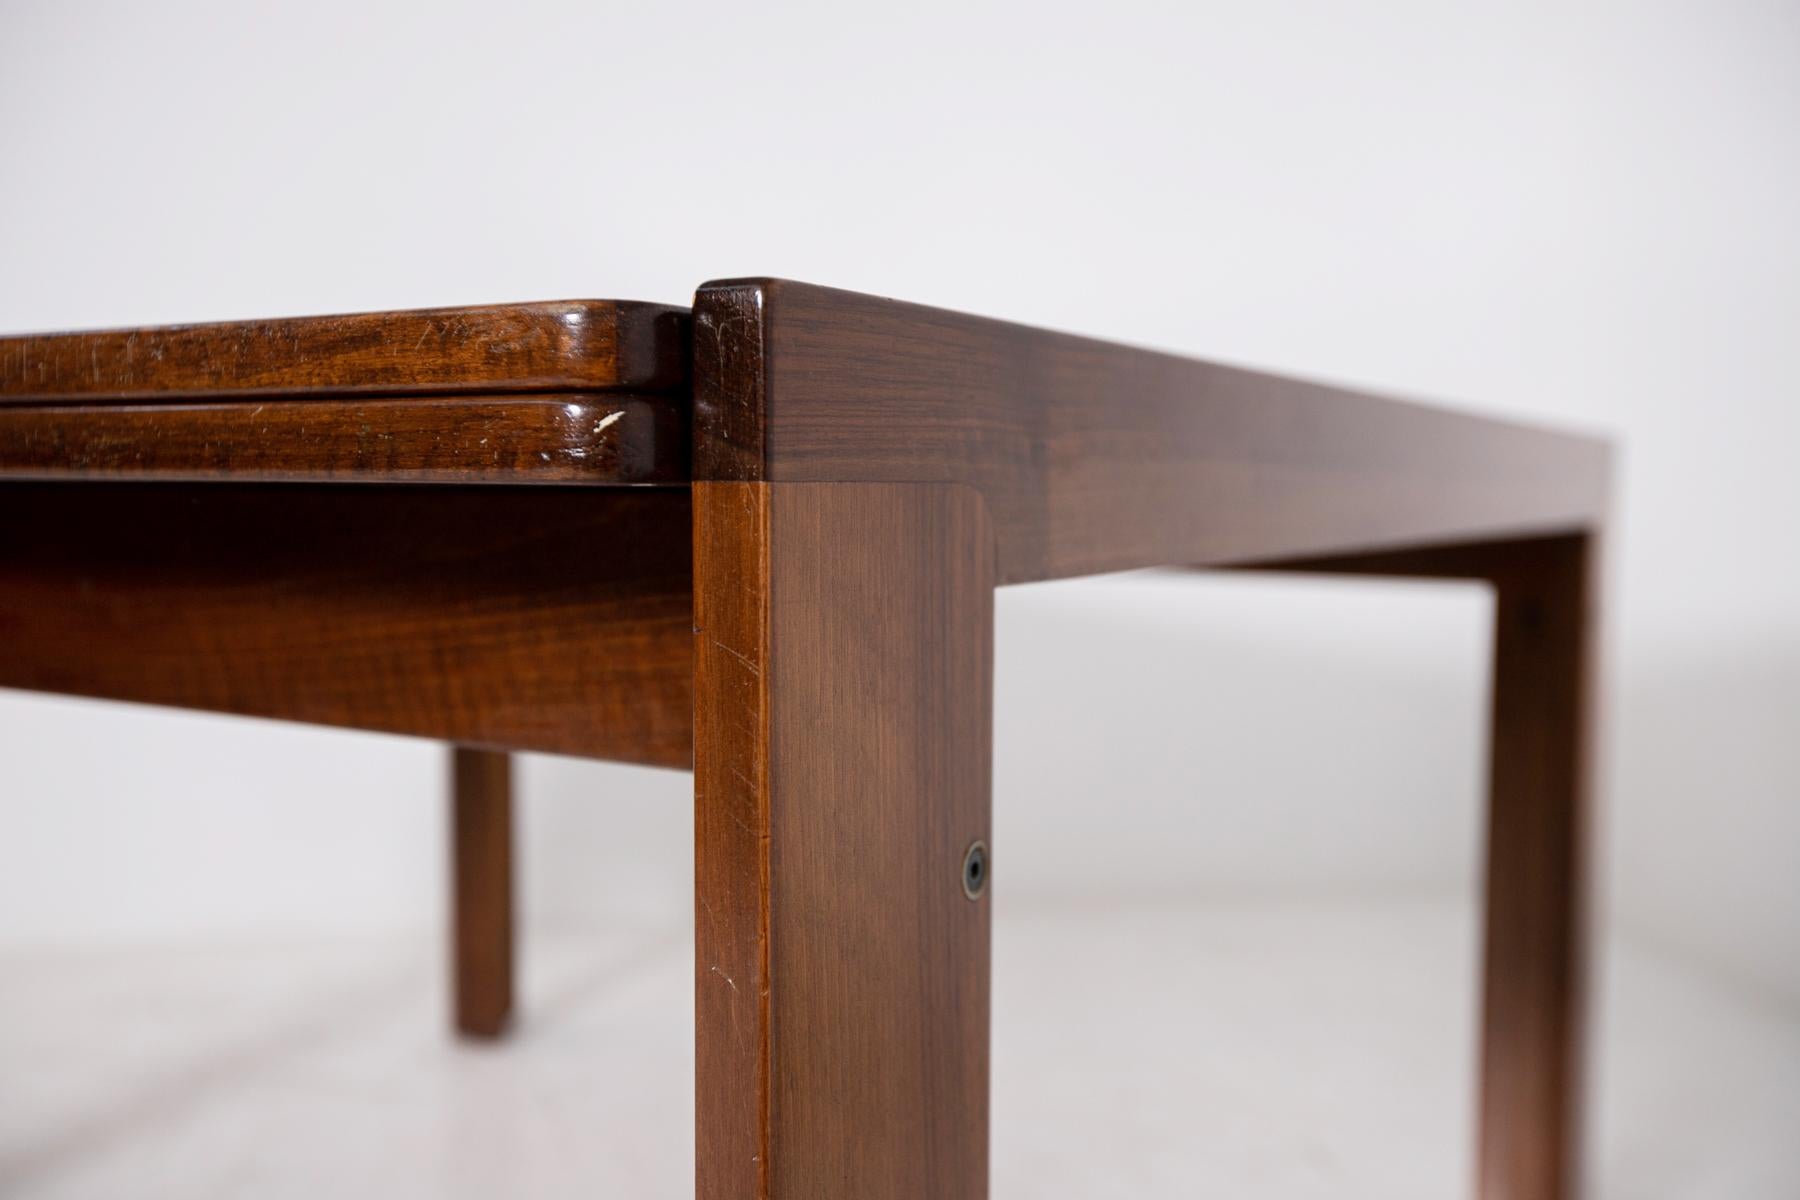 Beautiful table commissioned by Afra and Tobia Scarpa for the Cassina manufacture in 1967.
Model 